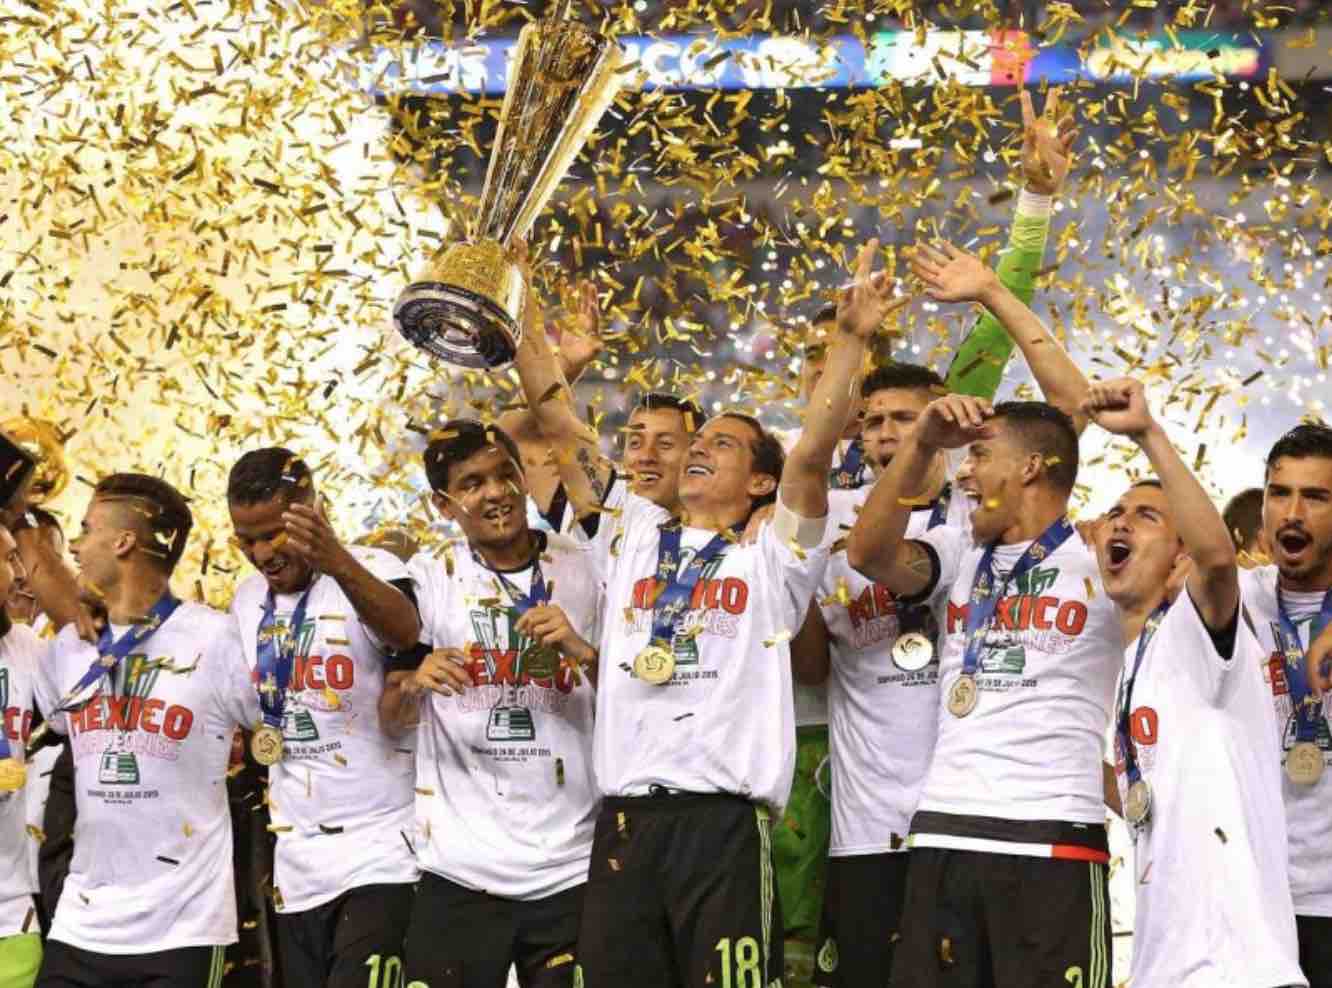 Fox analyst Mariano Trujillo on the stakes of CONCACAF Cup: “It’s the most important game” for Mexico